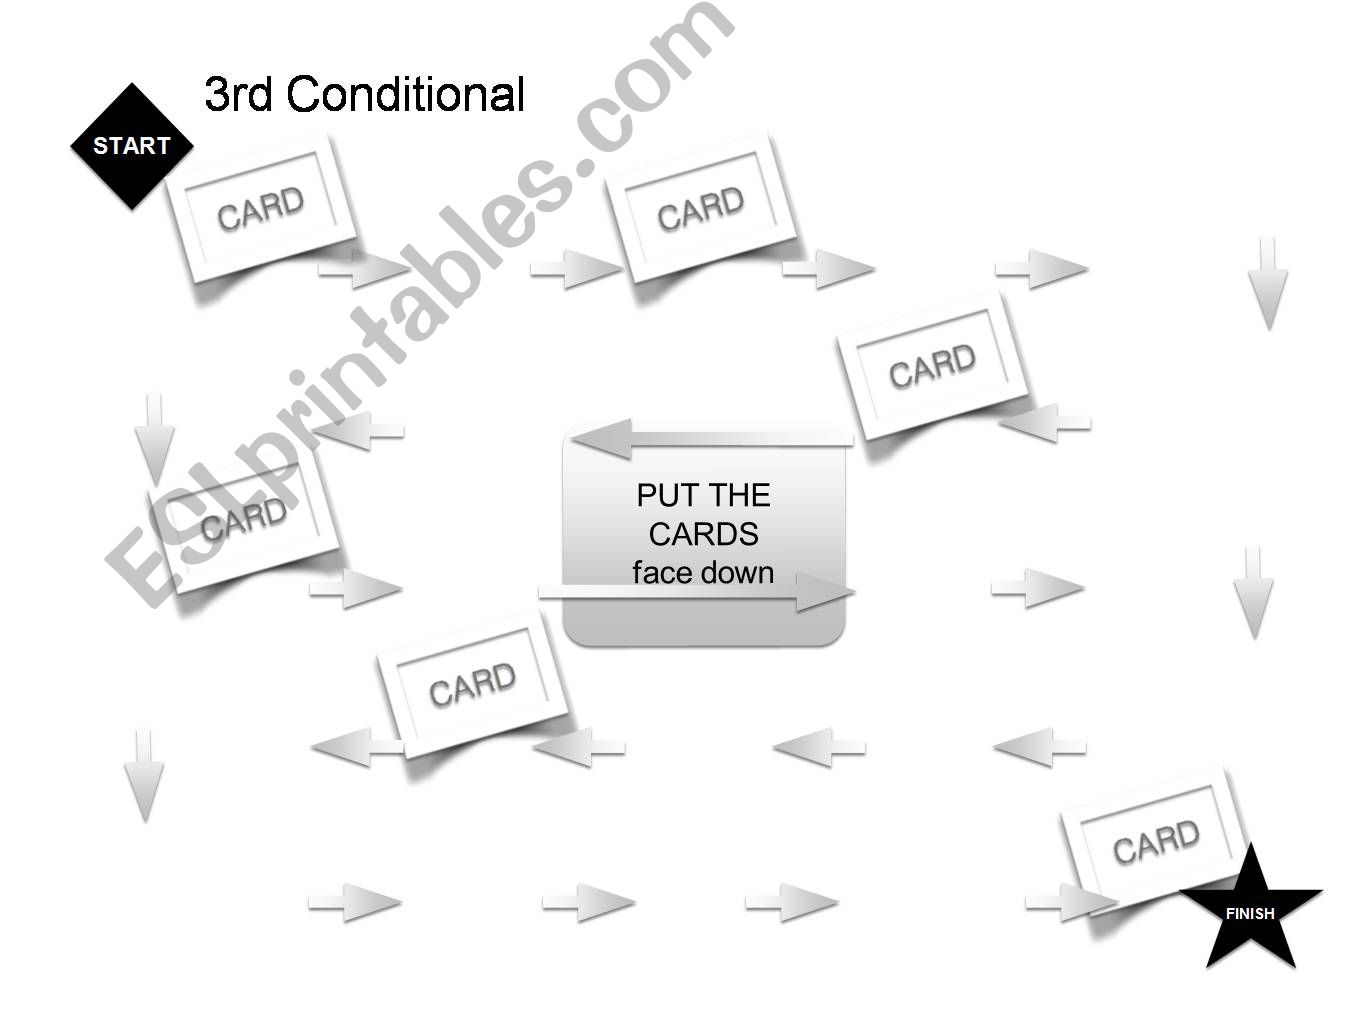 Third Conditional Board Game powerpoint